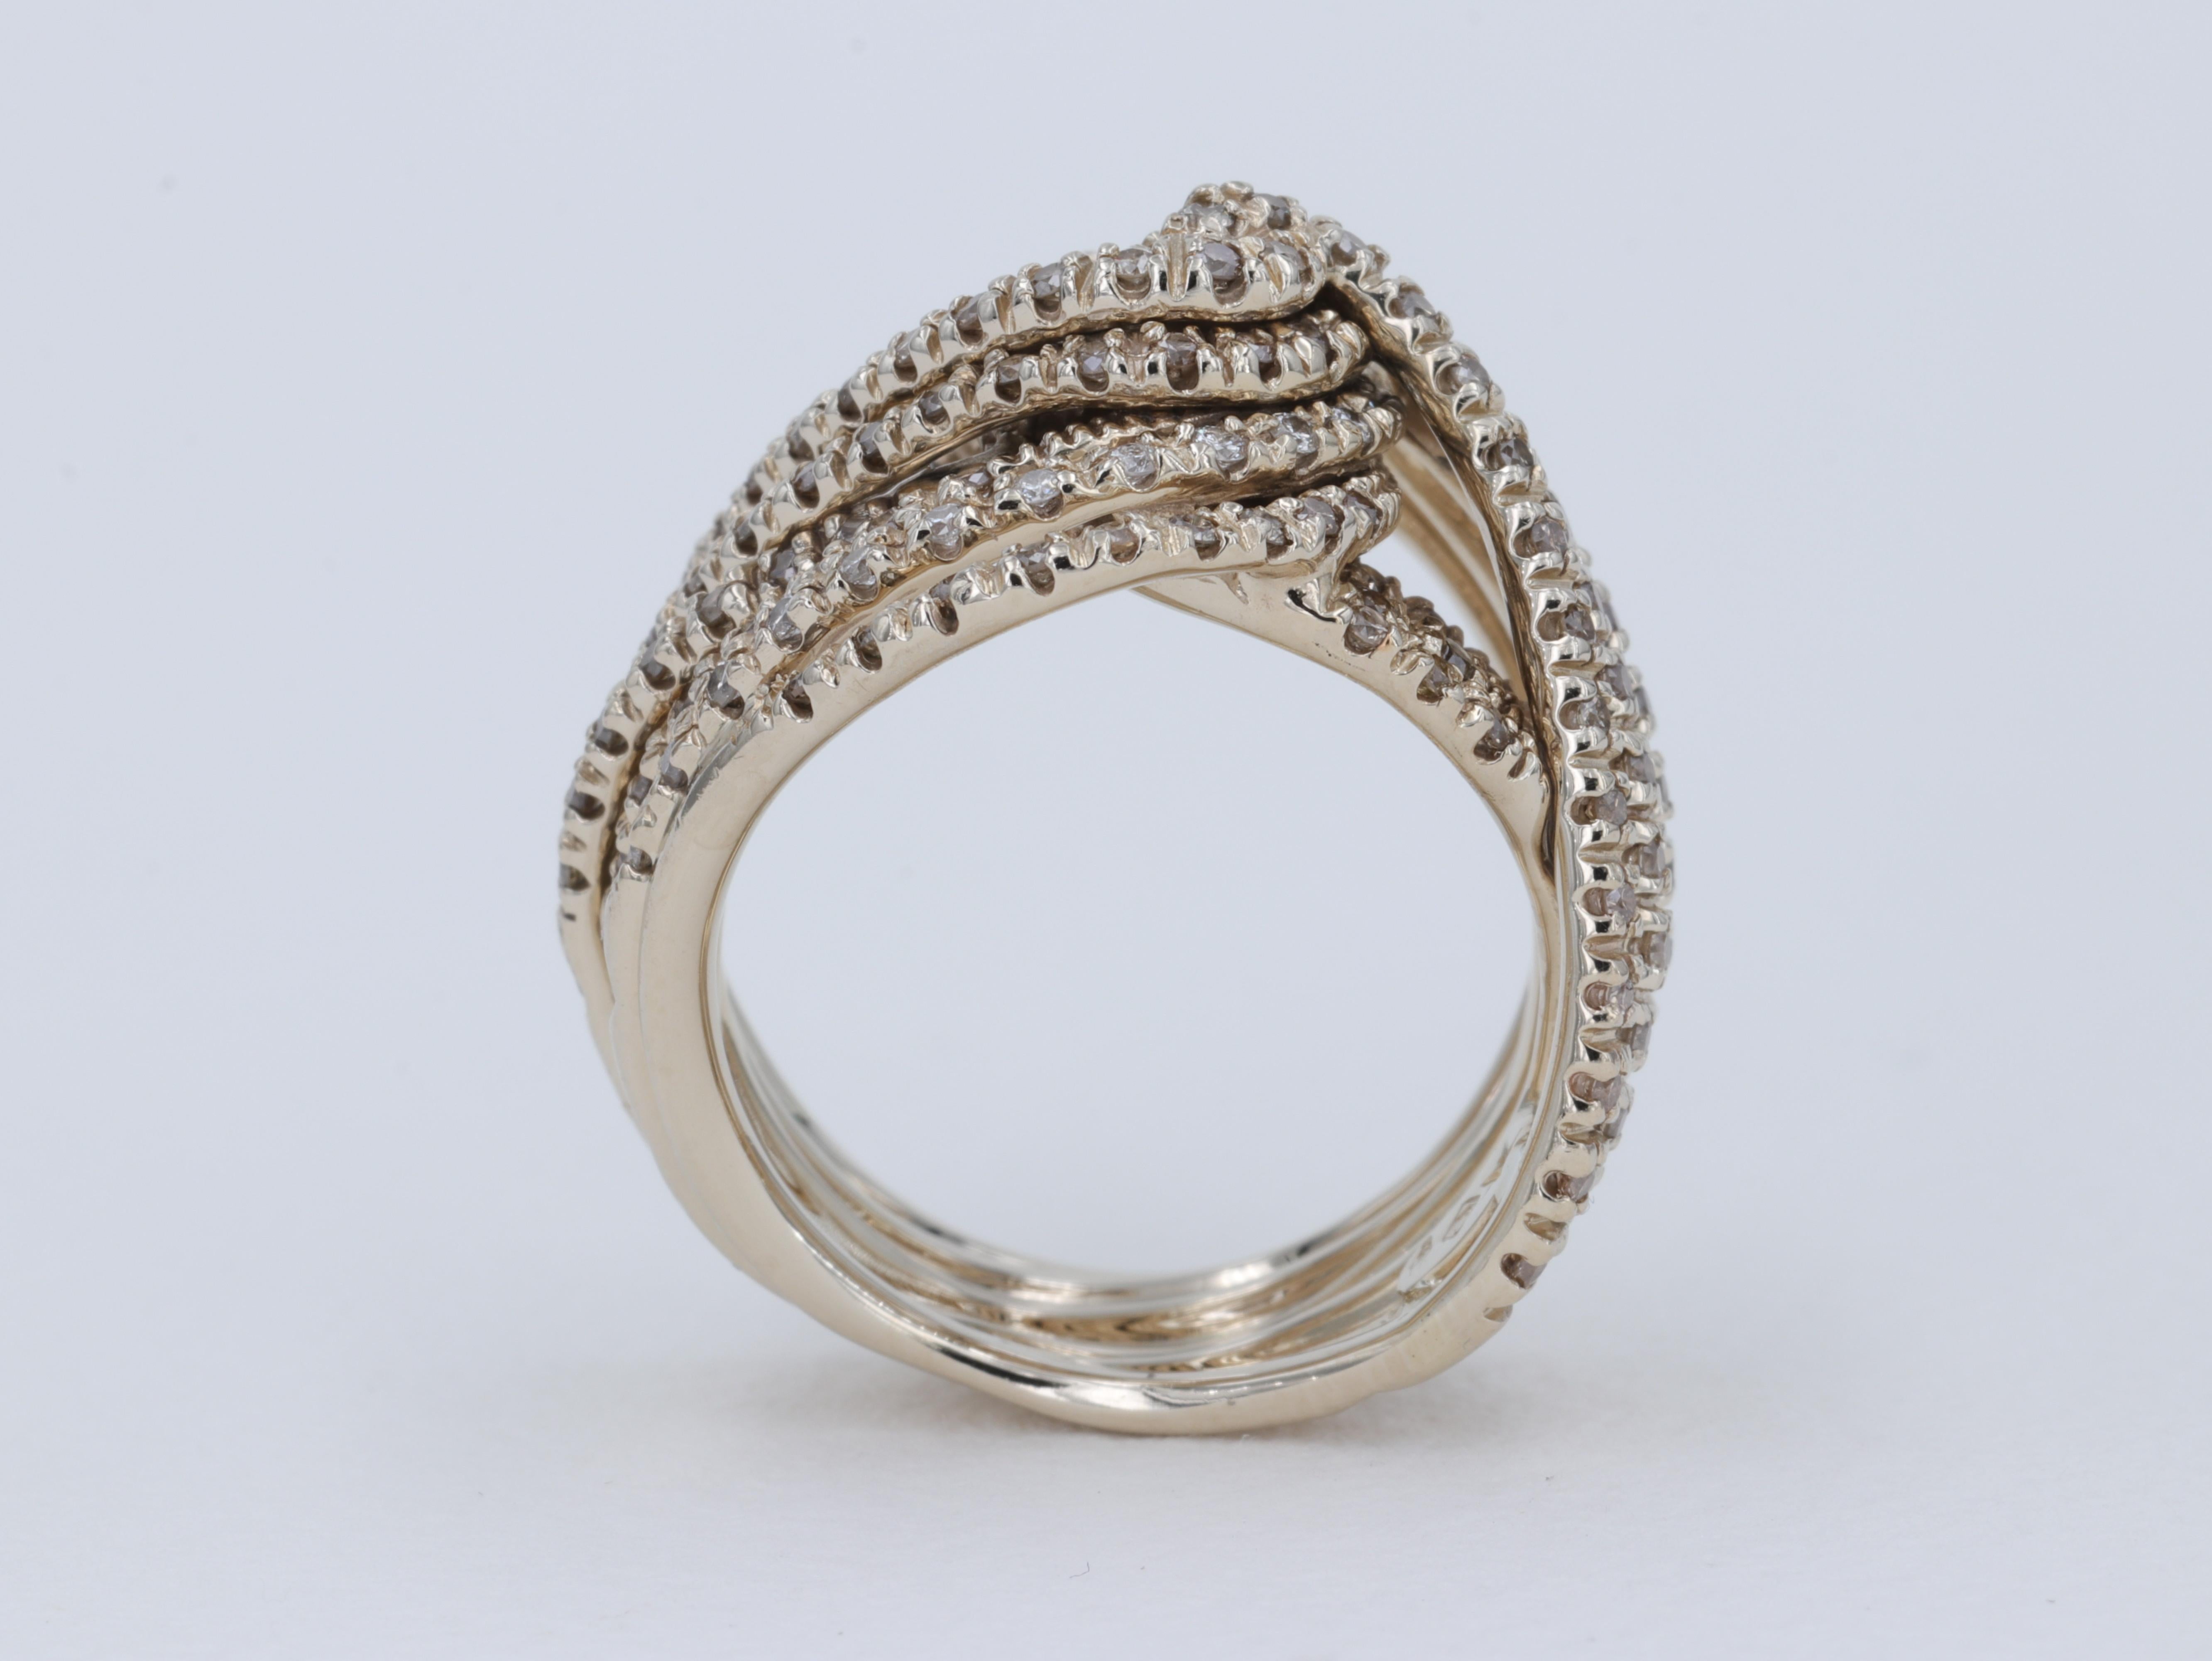 Modern H. Stern Zephyr Diamond and Noble Gold Multi Row Twist Ring Band